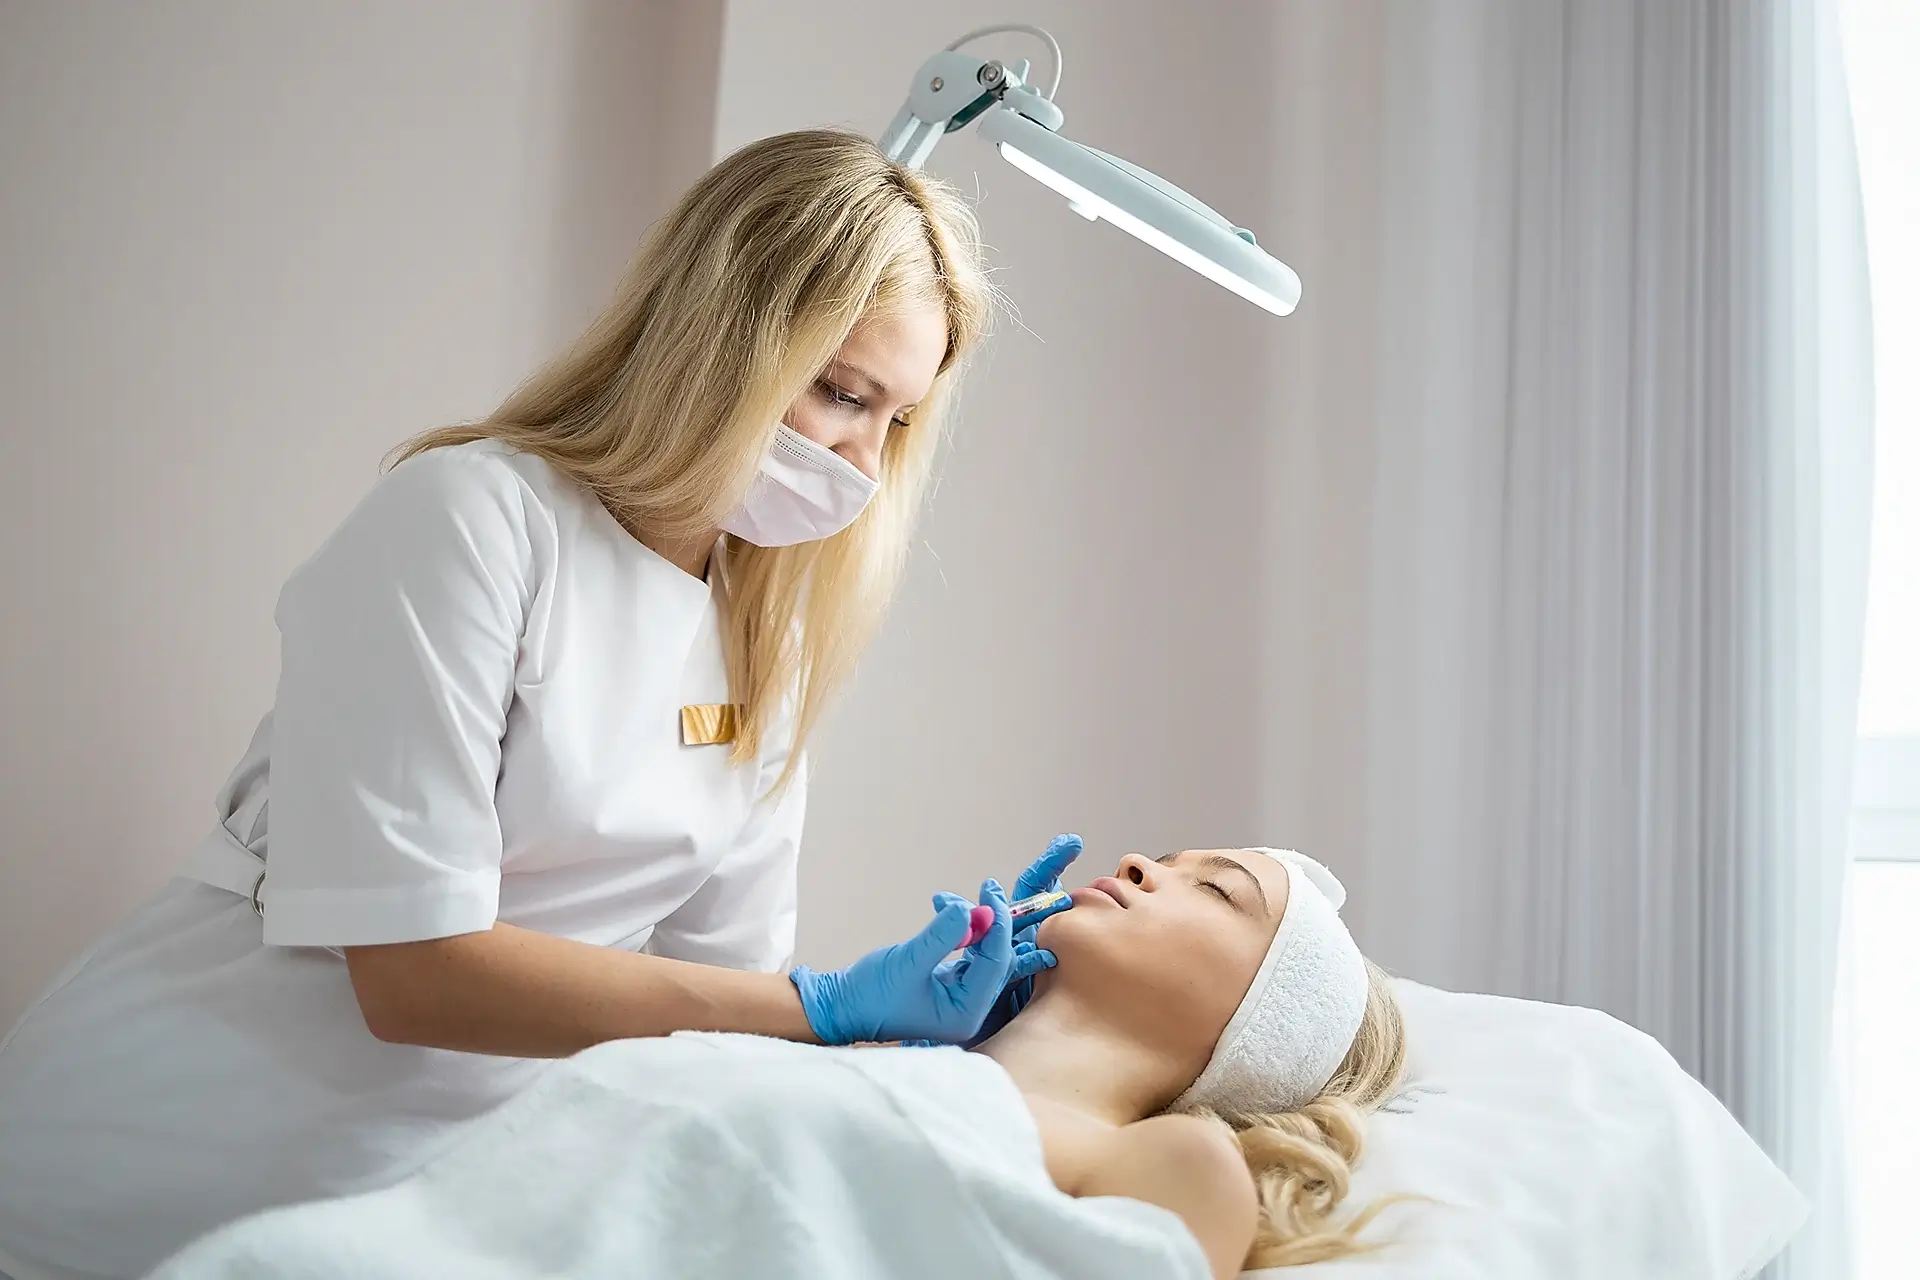 The Ultimate Guide to Beauty Center Equipment: Essential Tools for Aesthetics